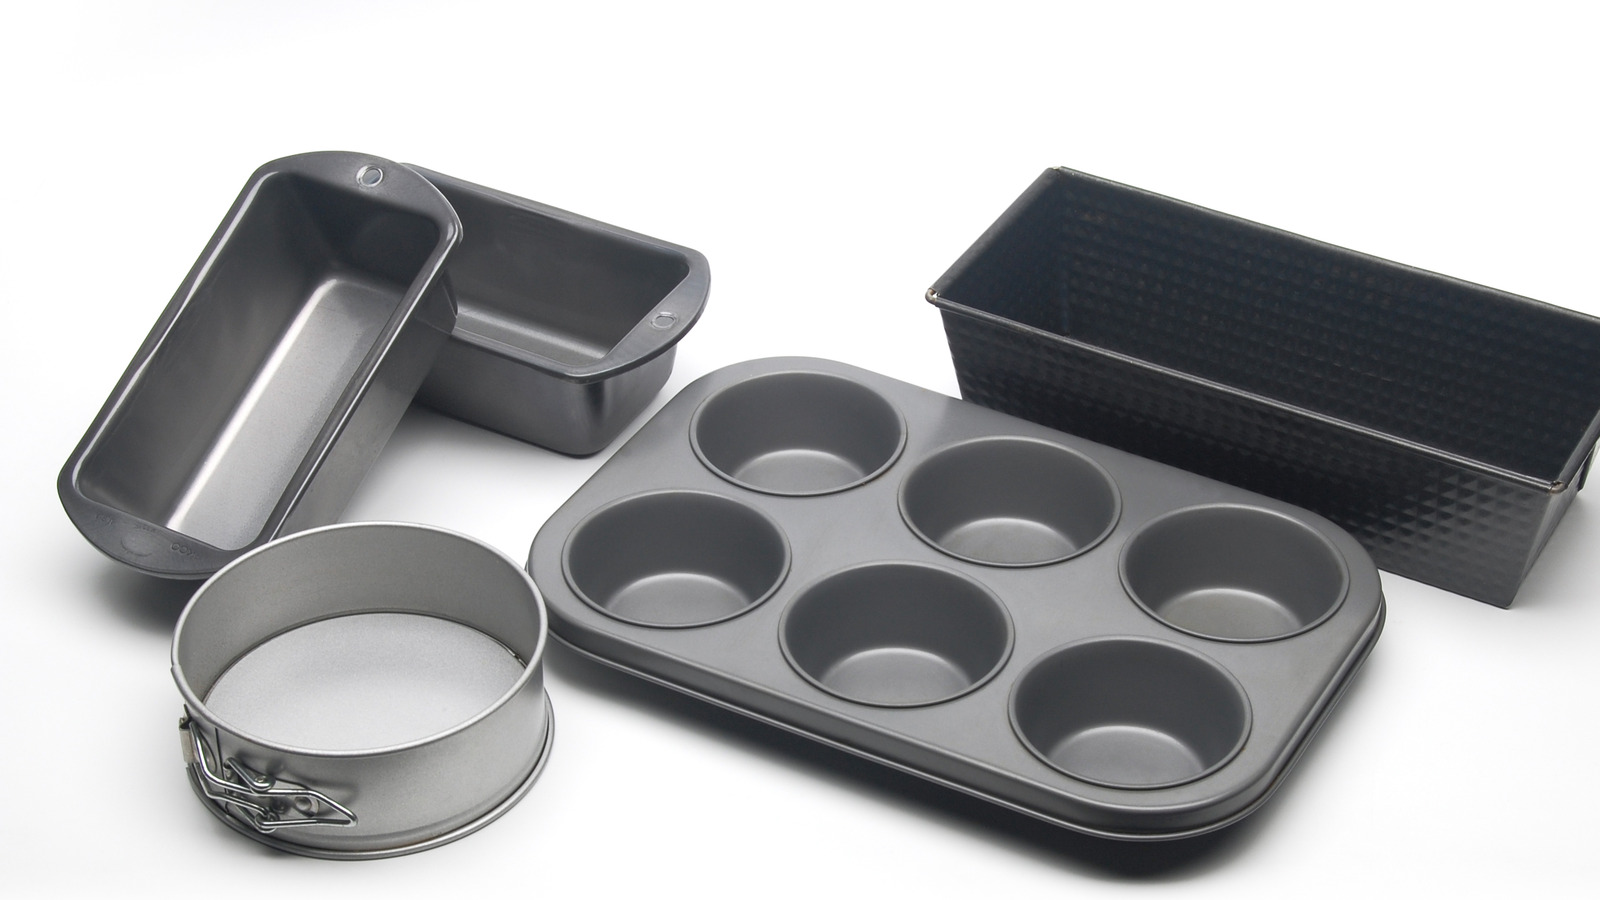 Best (and WORST) Baking Pans